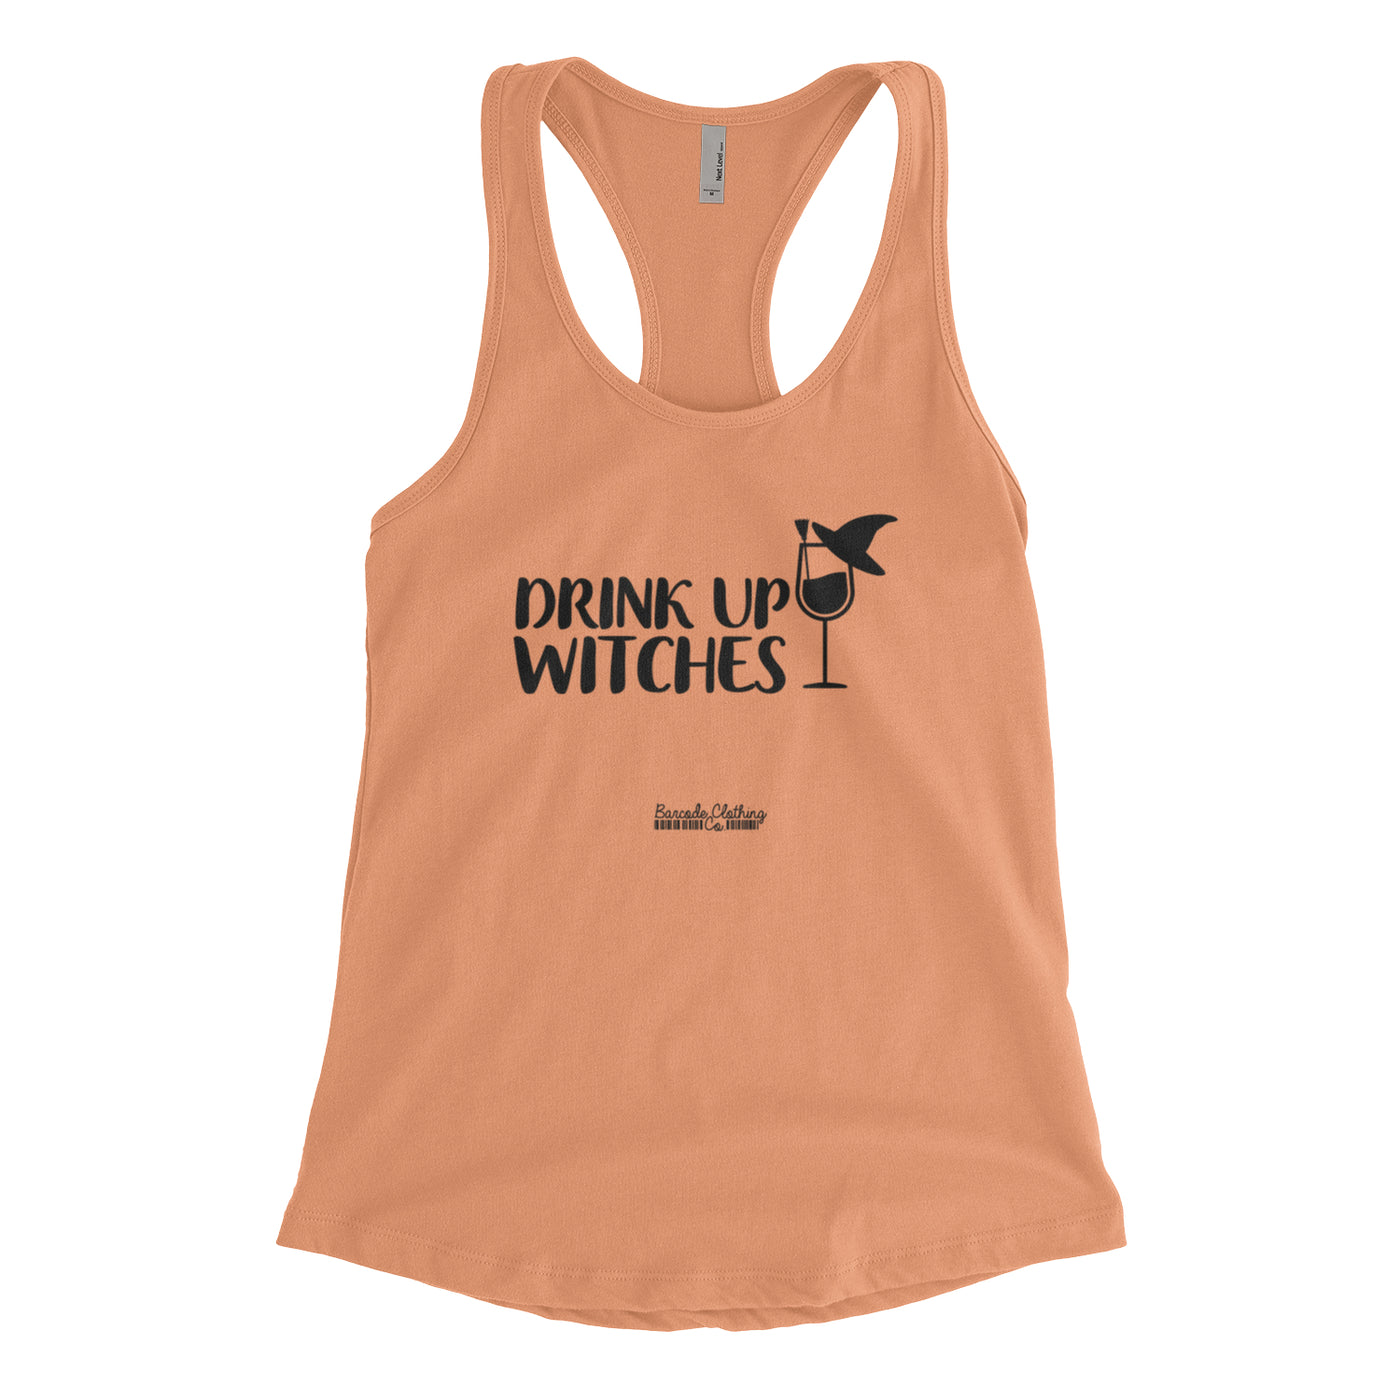 Drink Up Witches Blacked Out